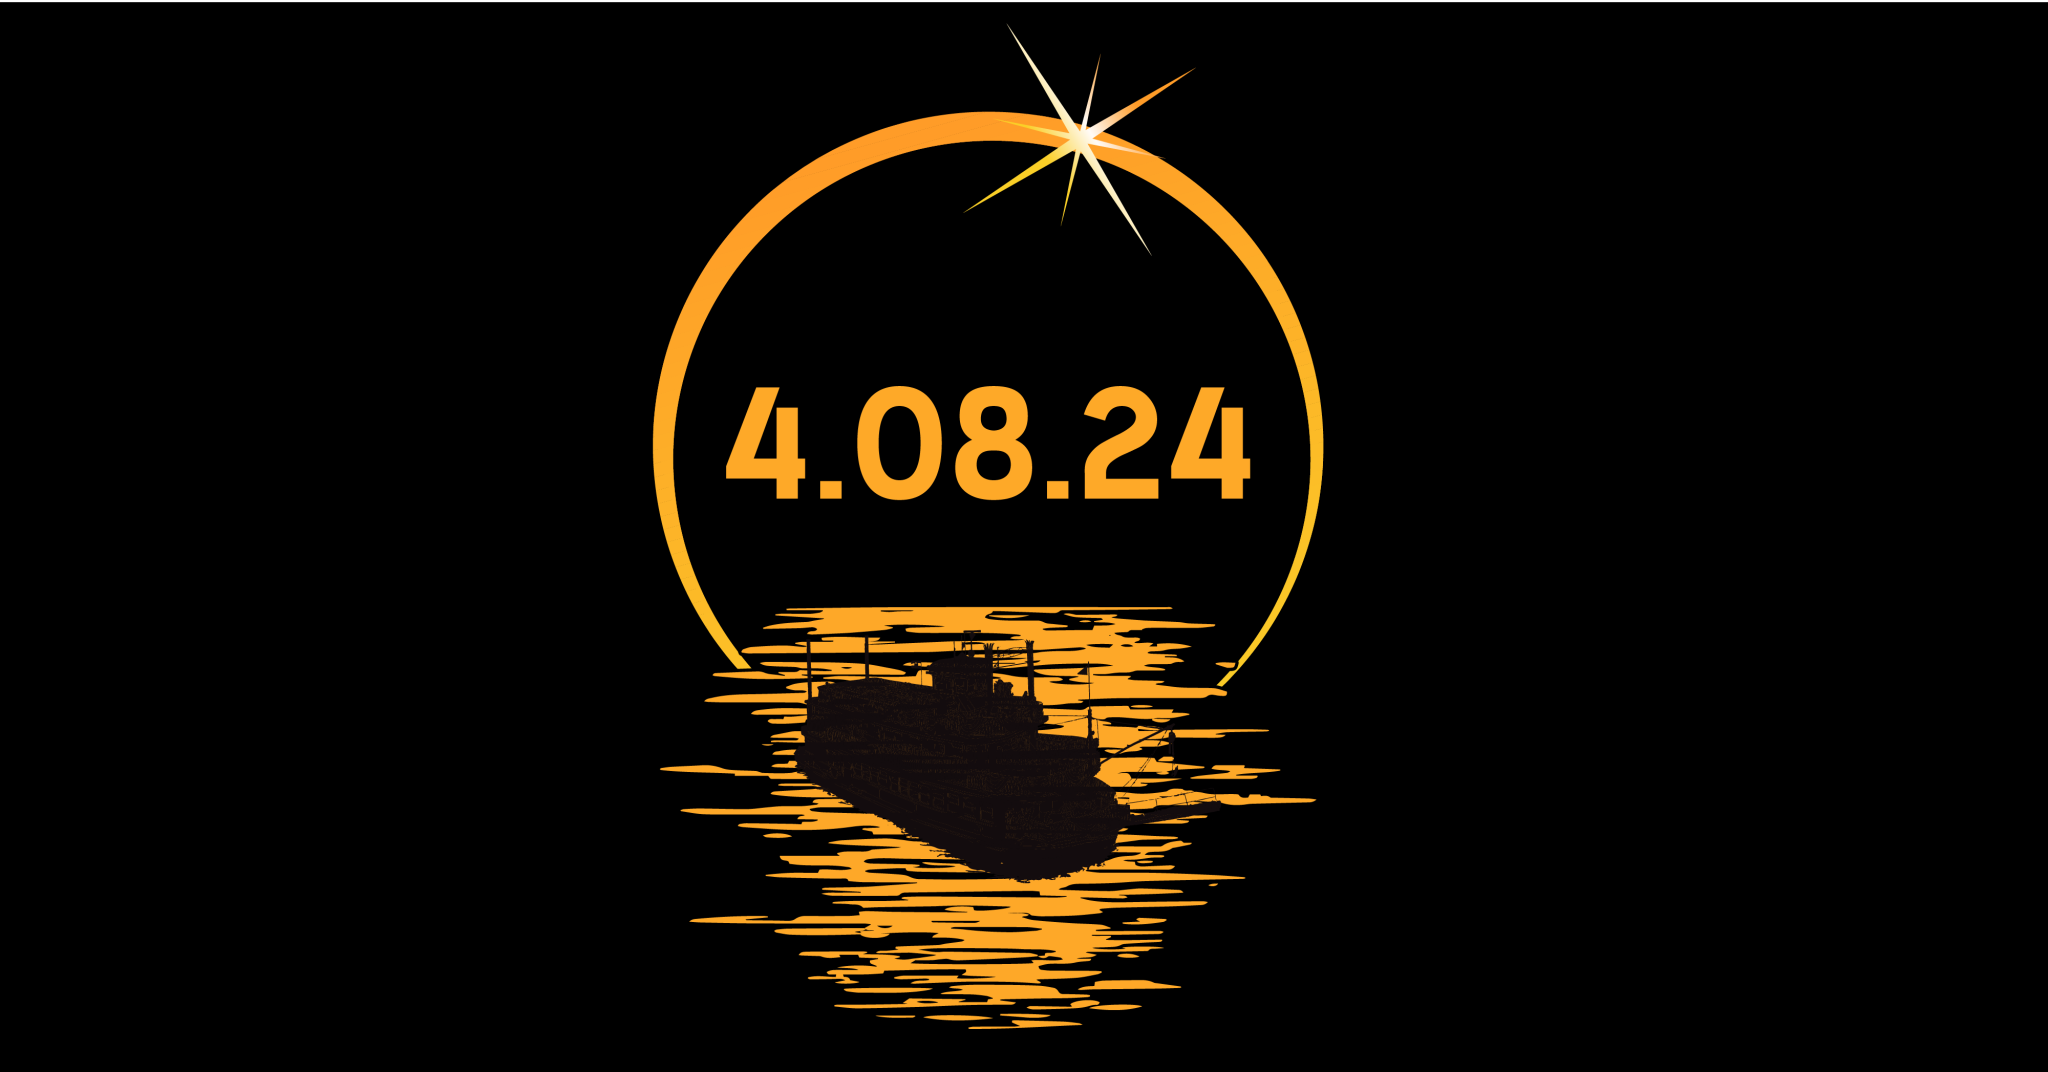 black background with an image of an eclipse over the water with a riverboat on it